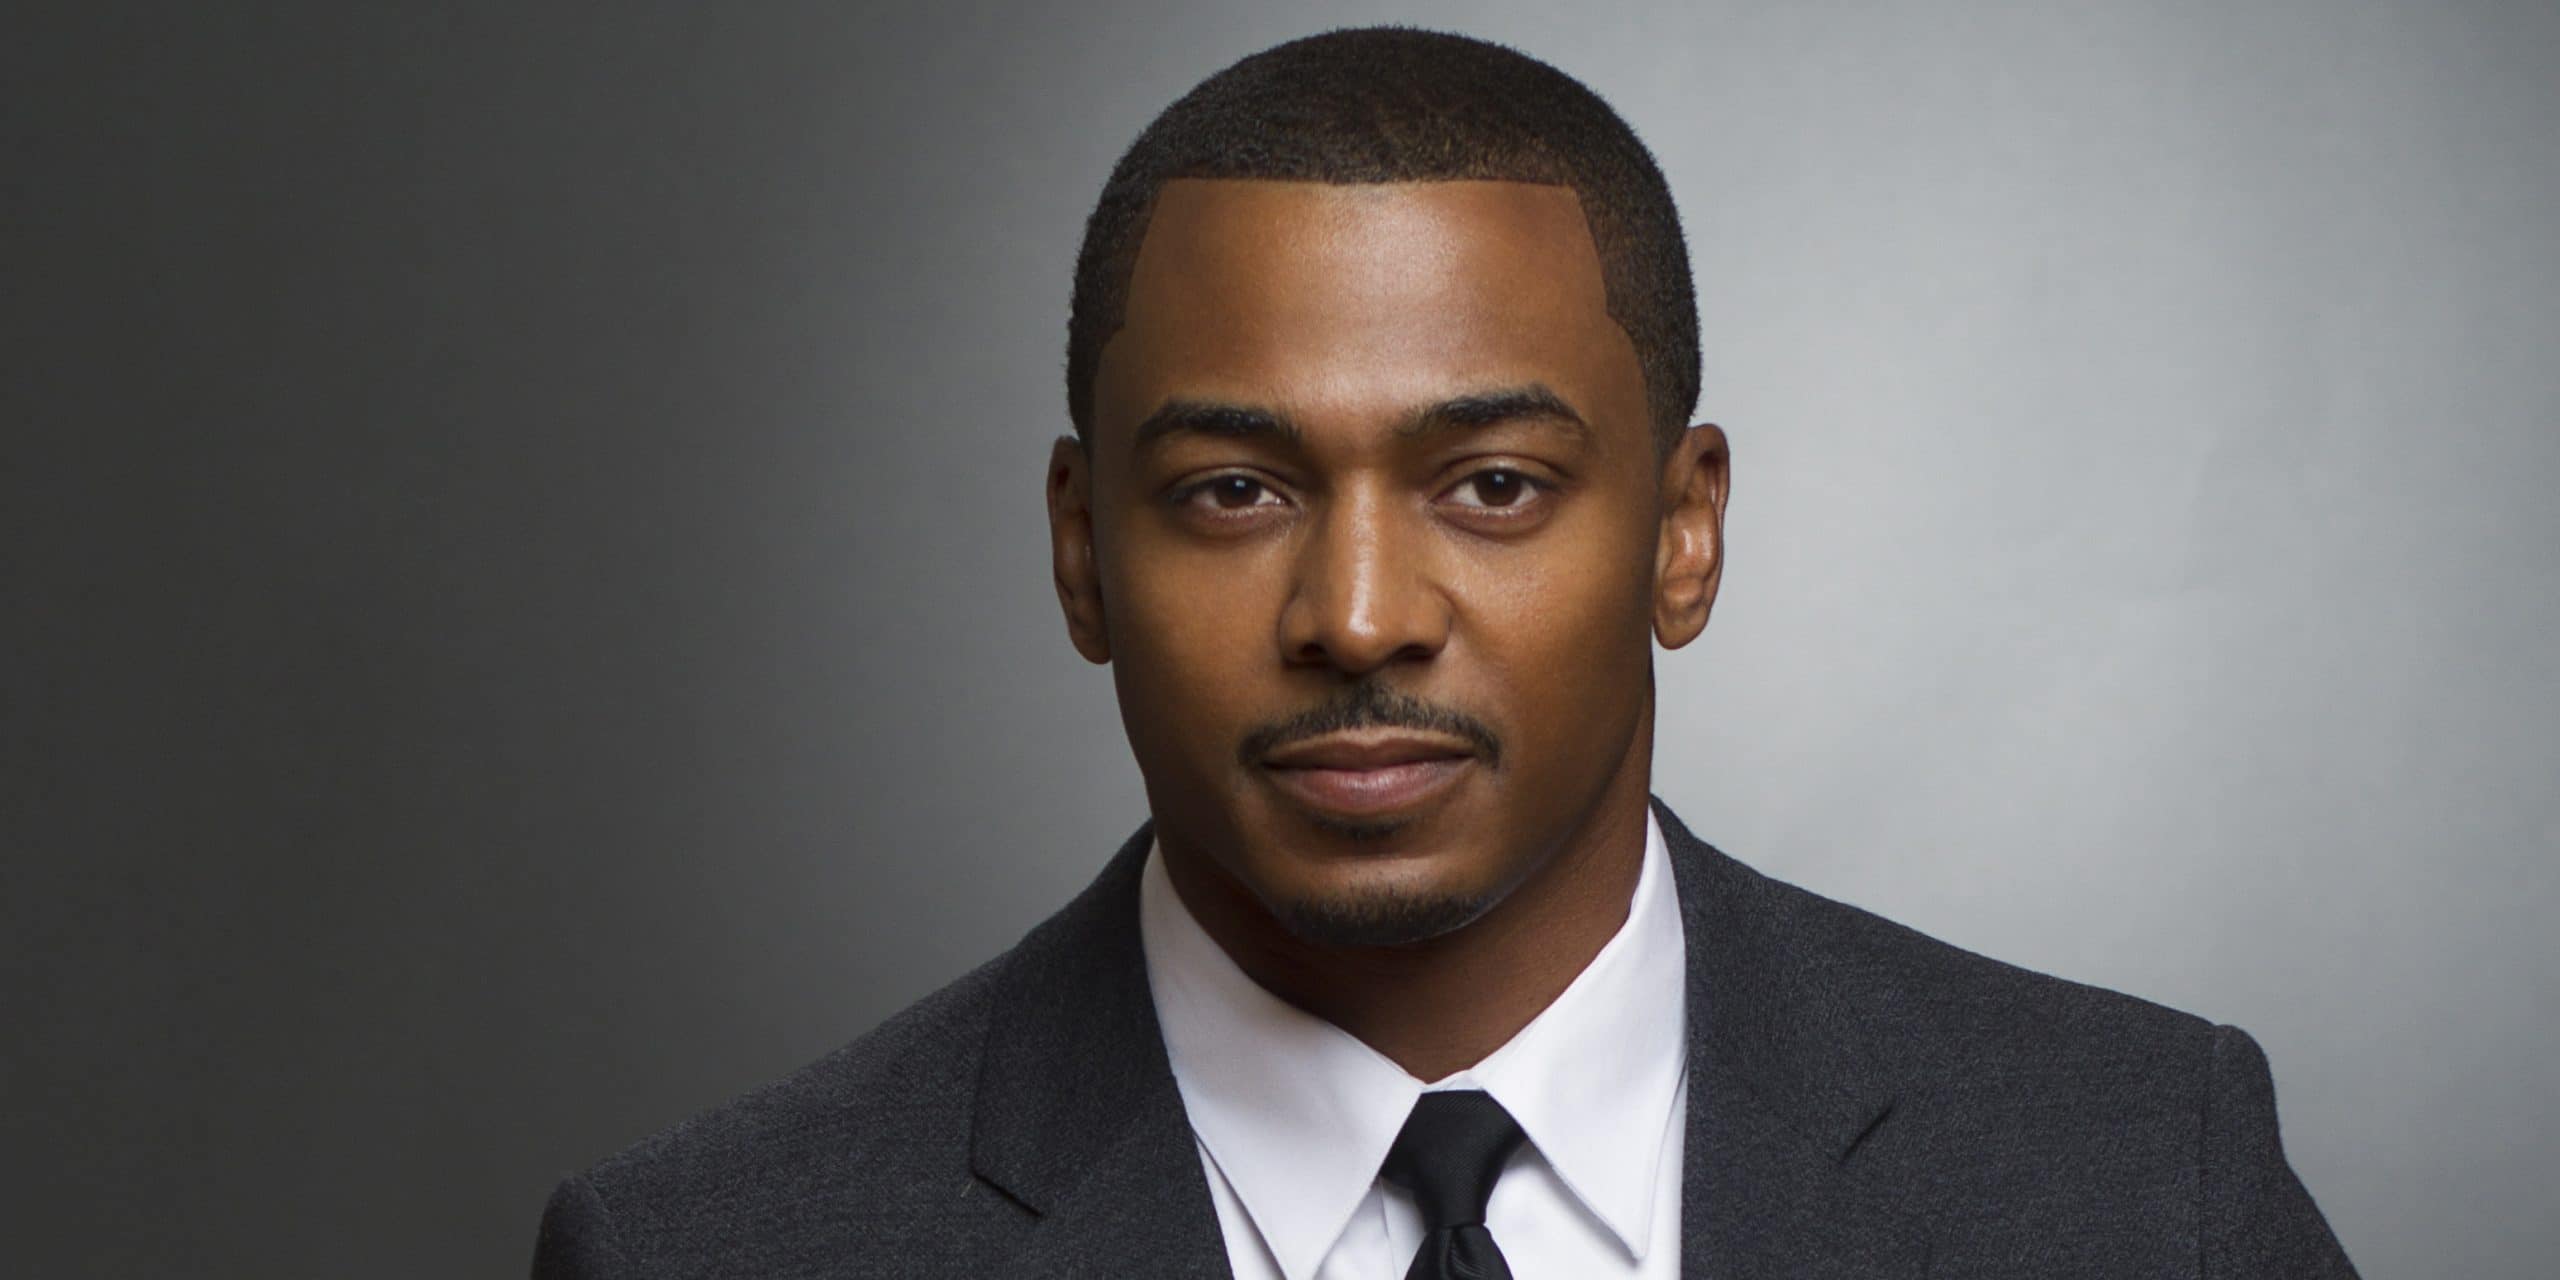 Ronreaco Lee Net Worth - $3 Million, Relationship With Sheana Freeman, Cars And More